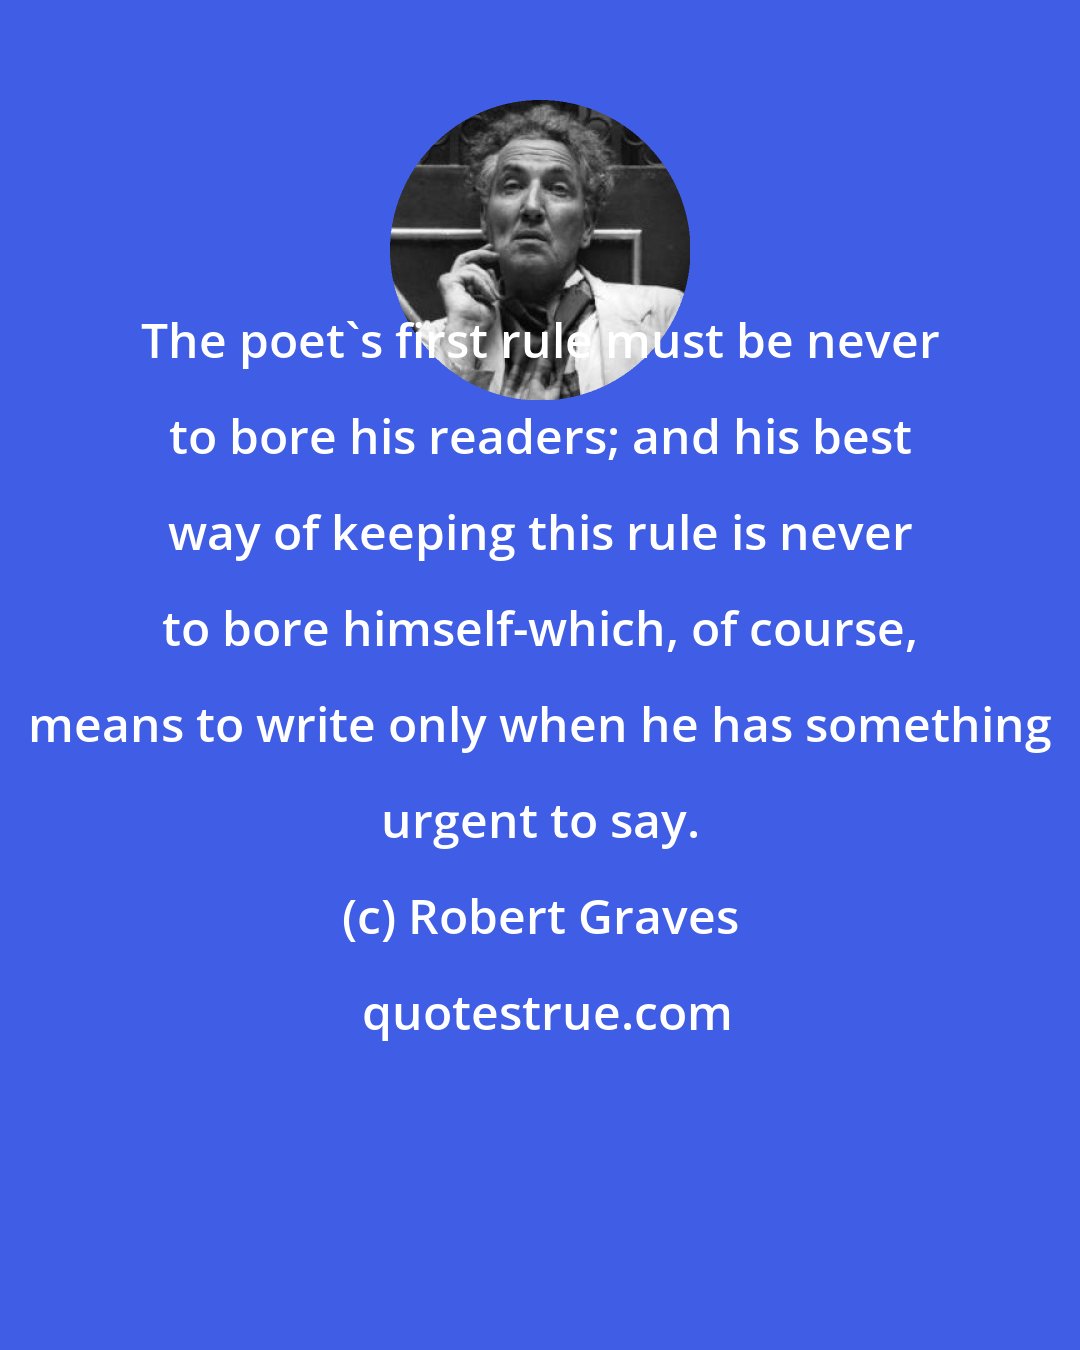 Robert Graves: The poet's first rule must be never to bore his readers; and his best way of keeping this rule is never to bore himself-which, of course, means to write only when he has something urgent to say.